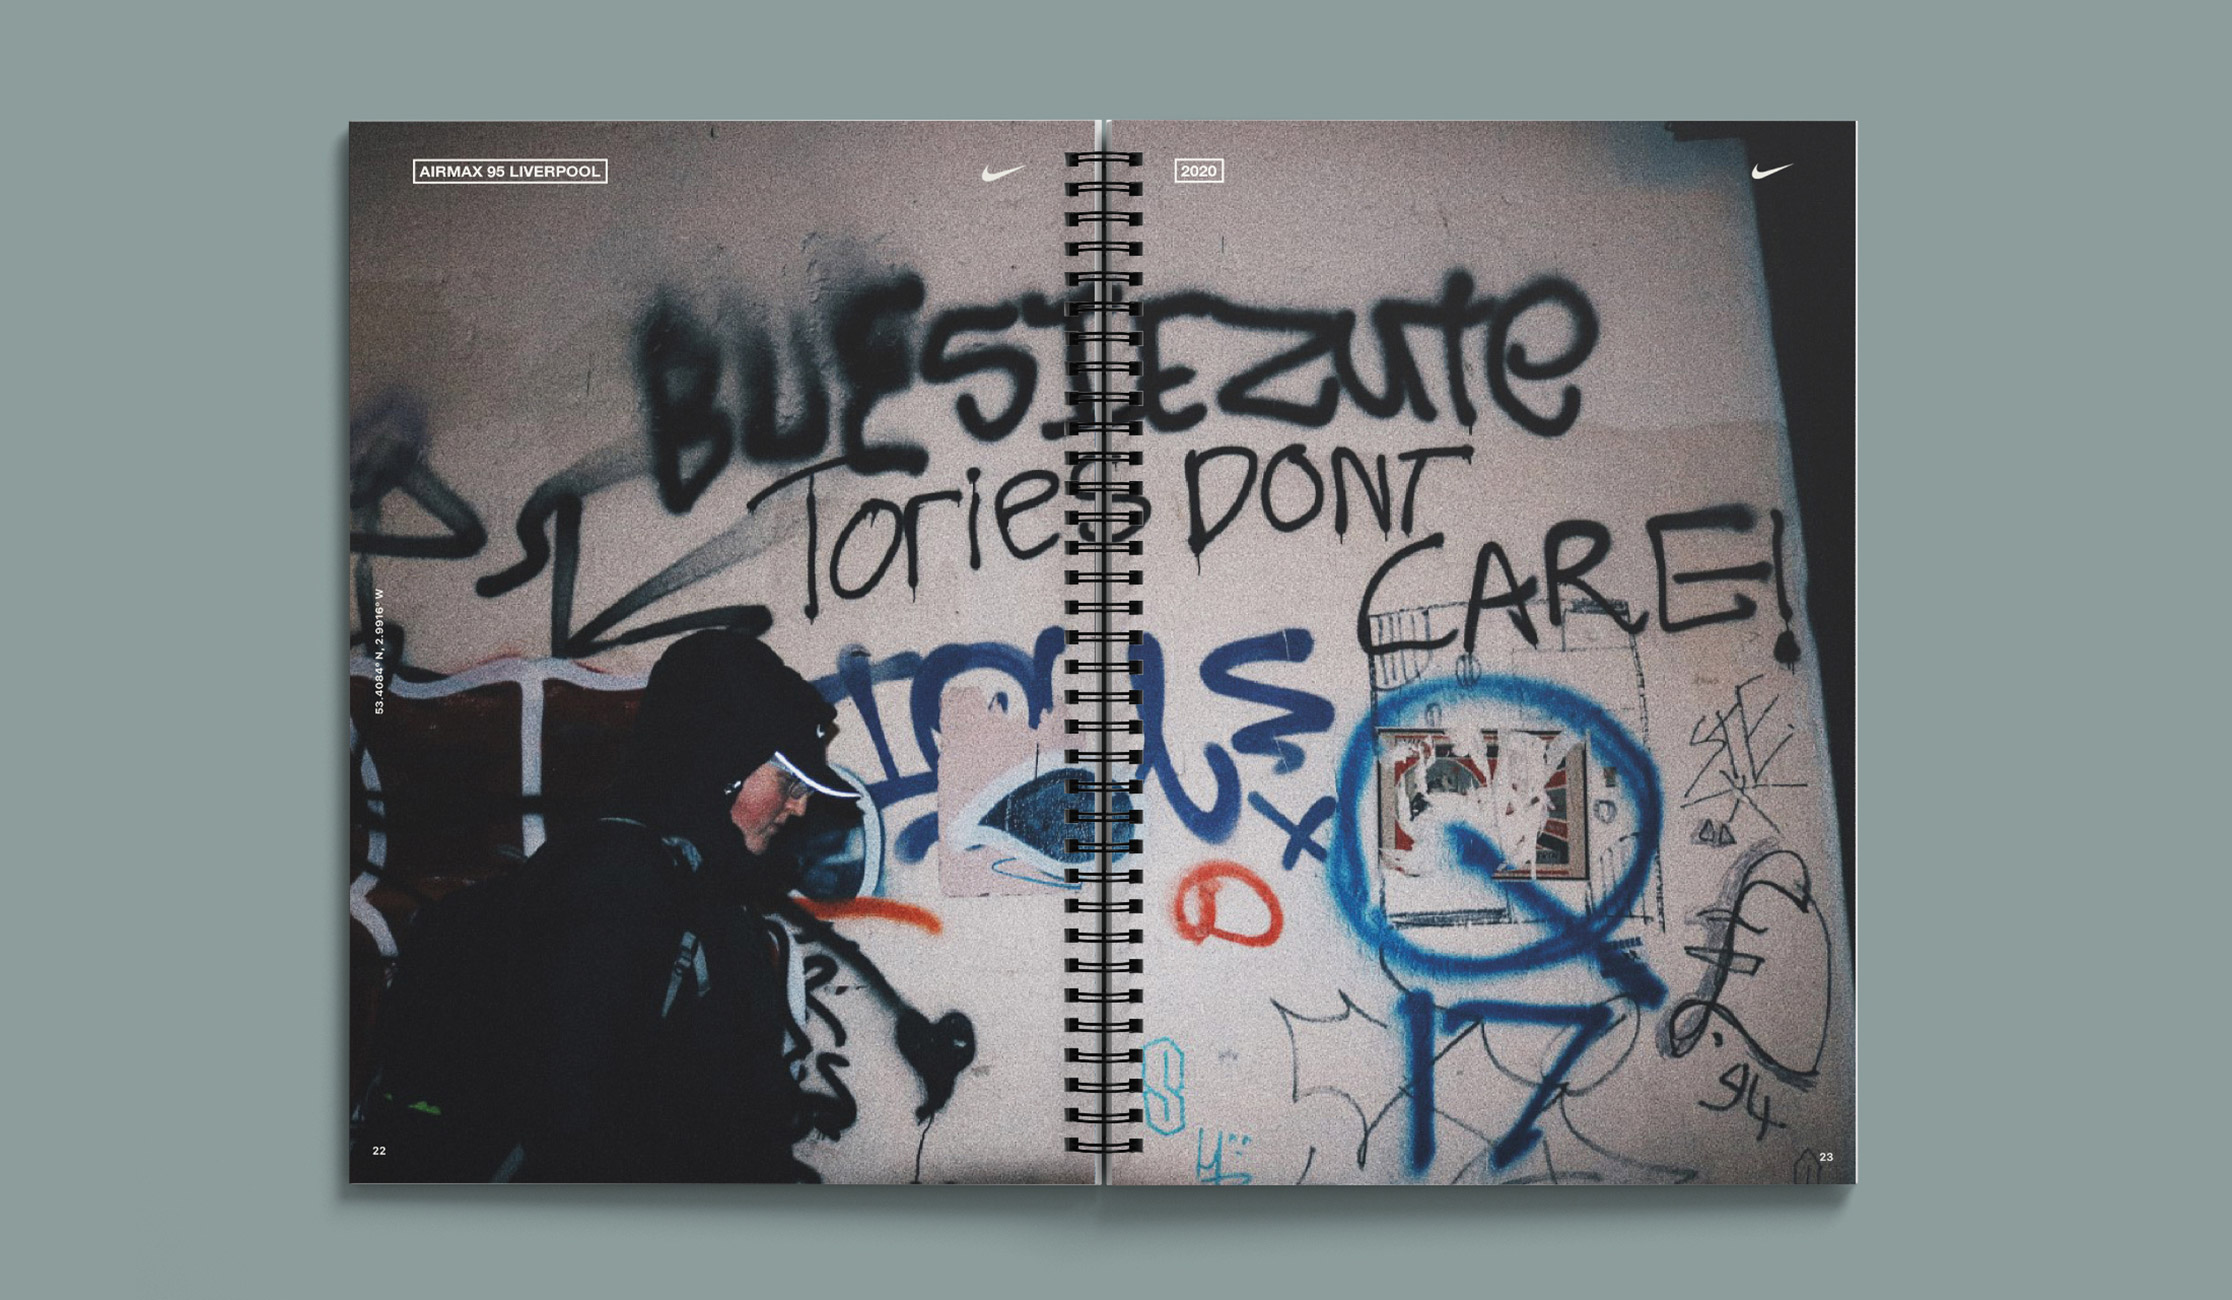 Publication spread featuring photography of graffiti